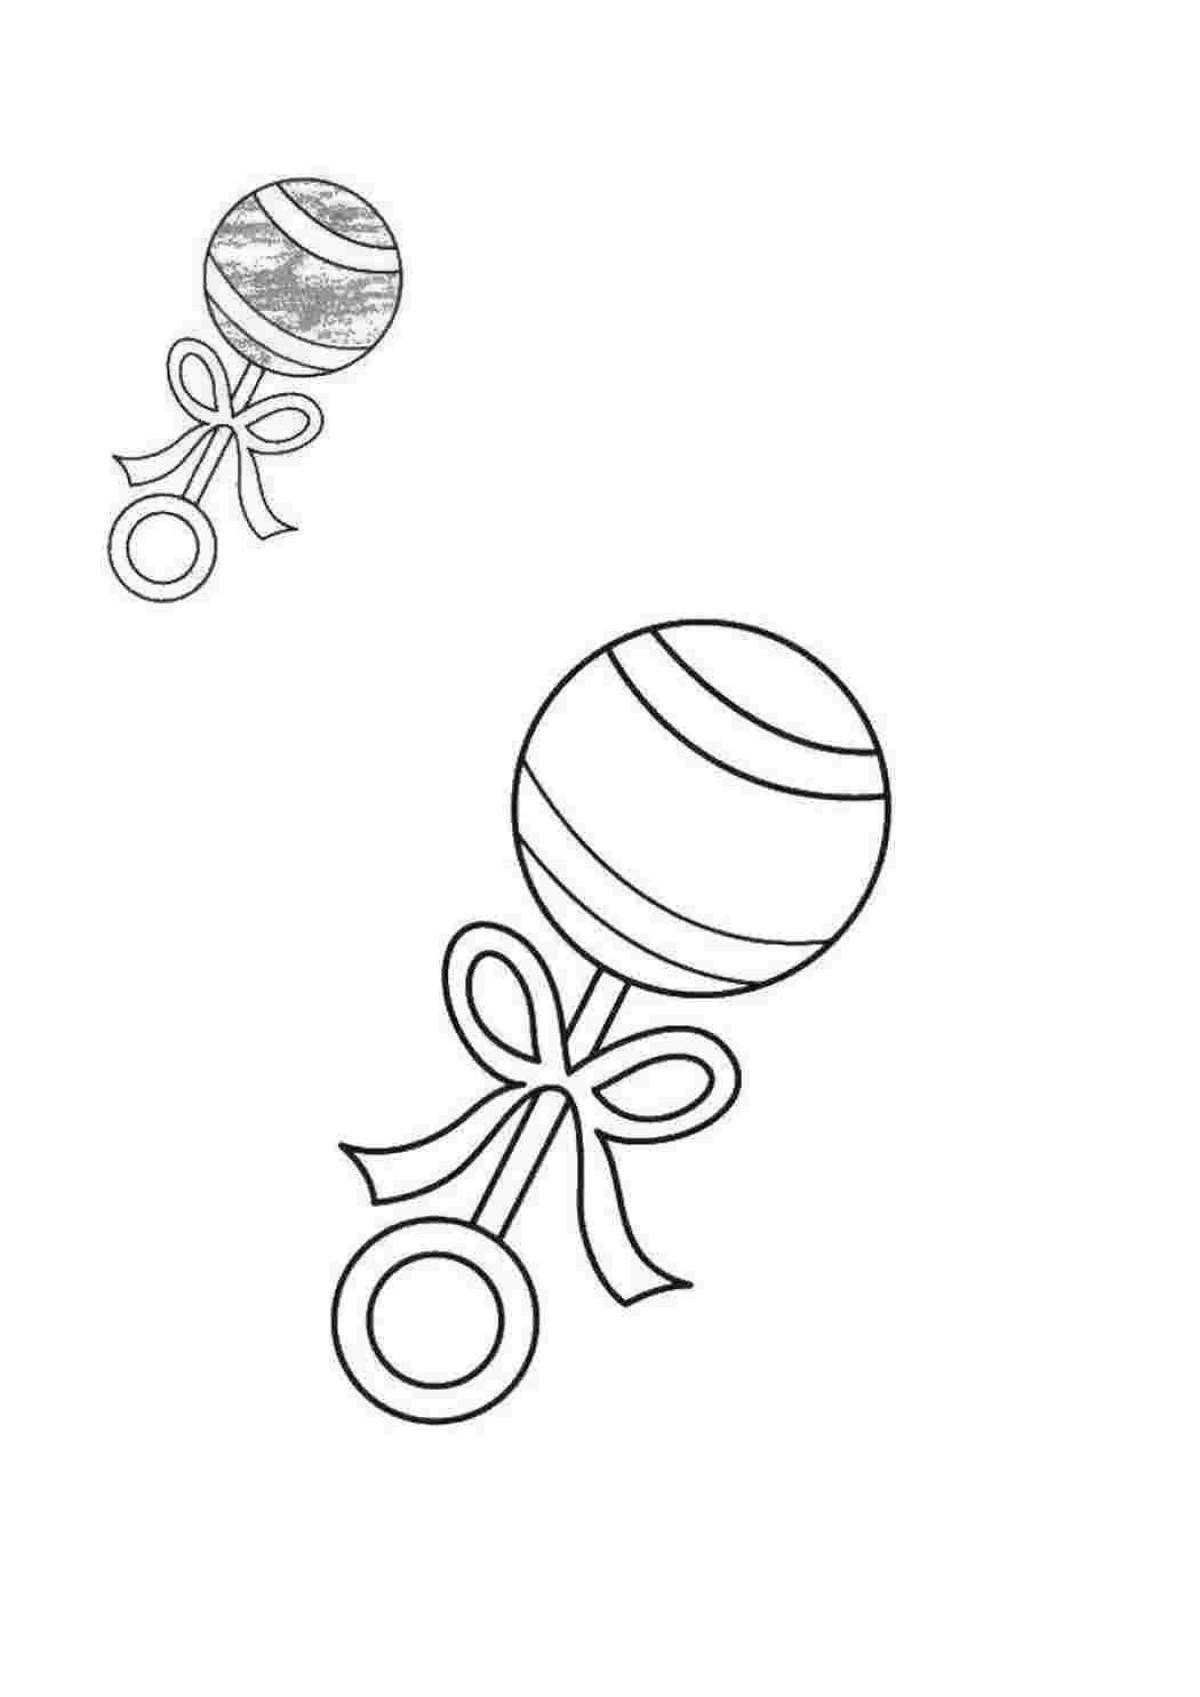 Coloring rattle for little ones